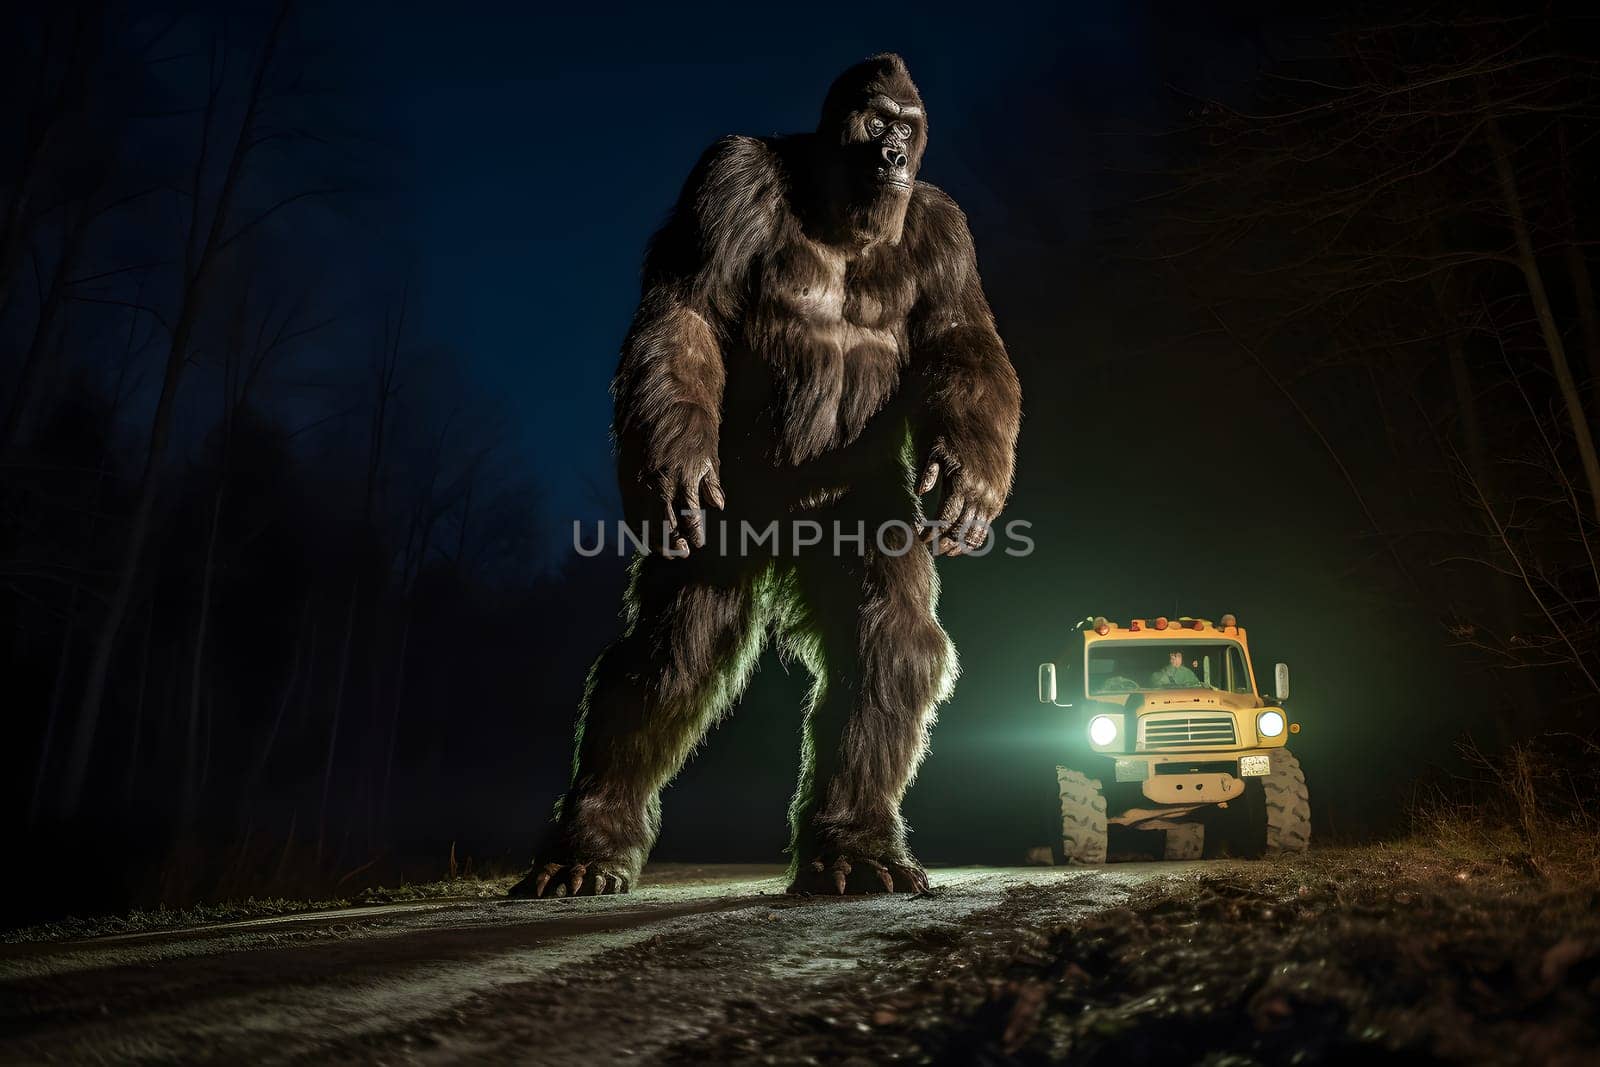 bigfoot running along interstate forest road at night in light of car headlights, neural network generated photorealistic image by z1b